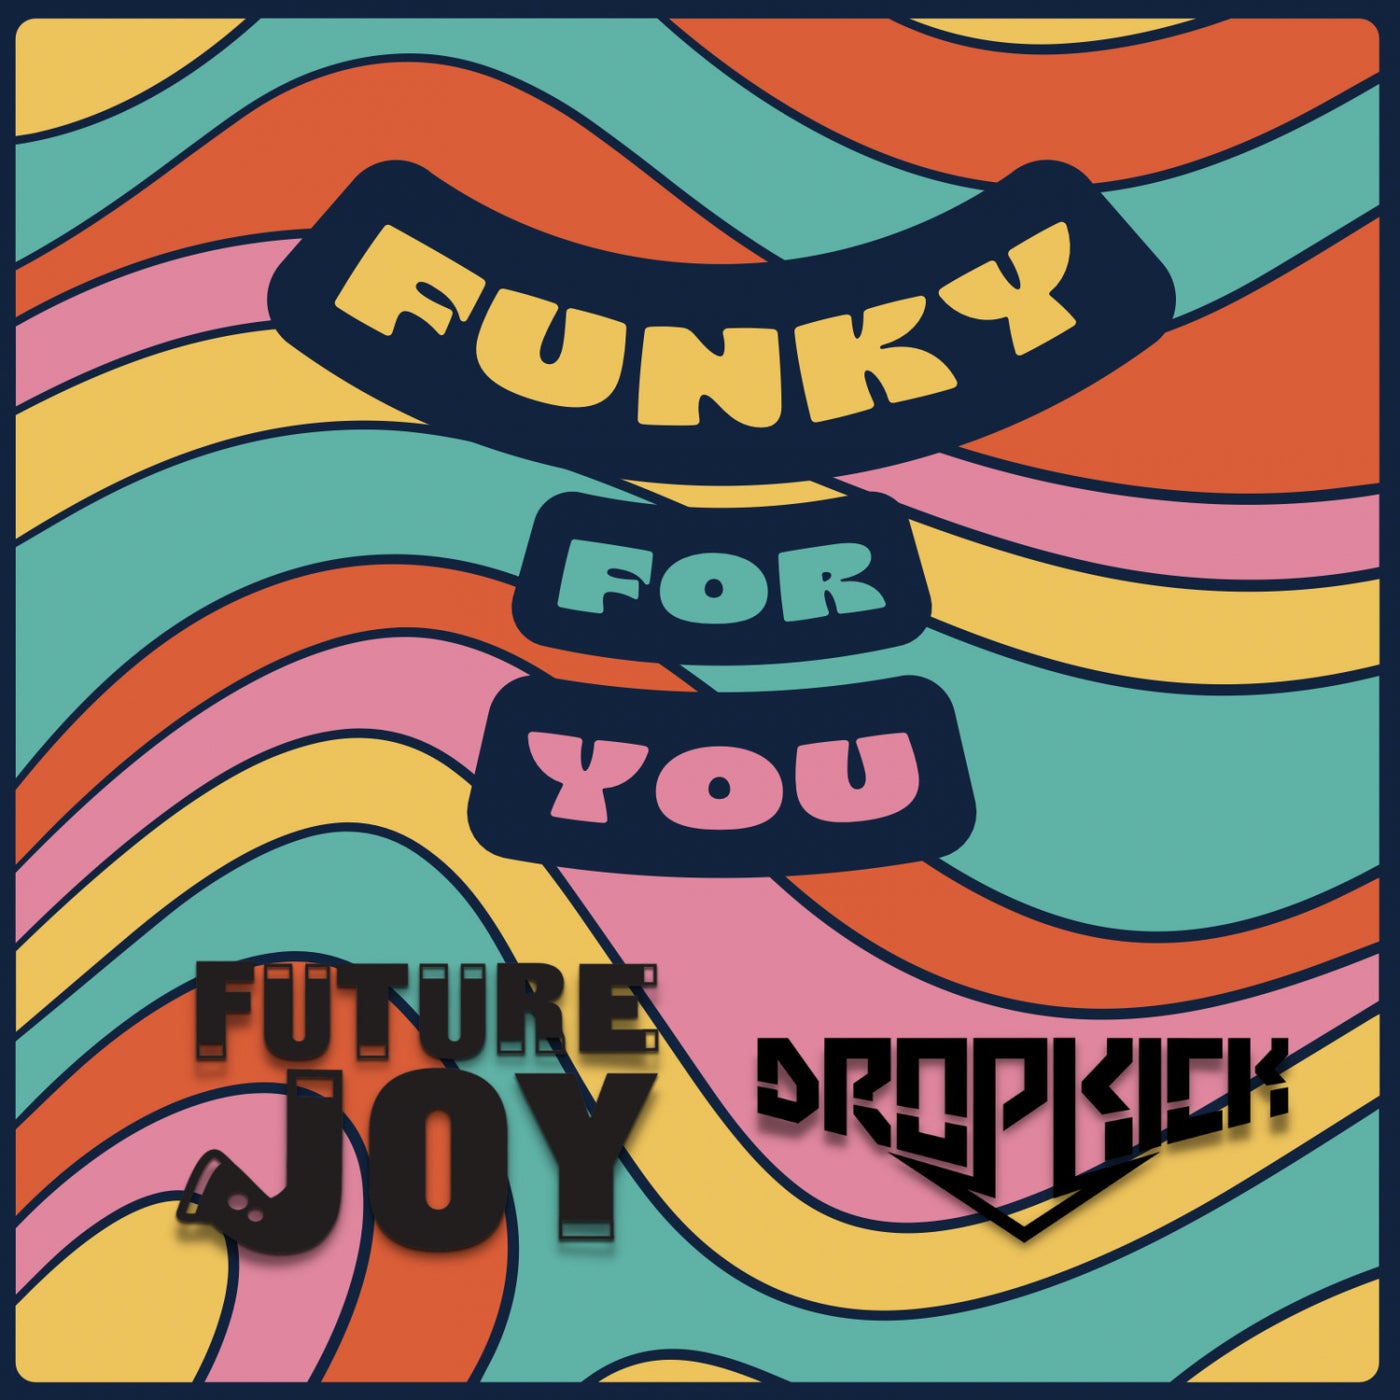 Funky for You